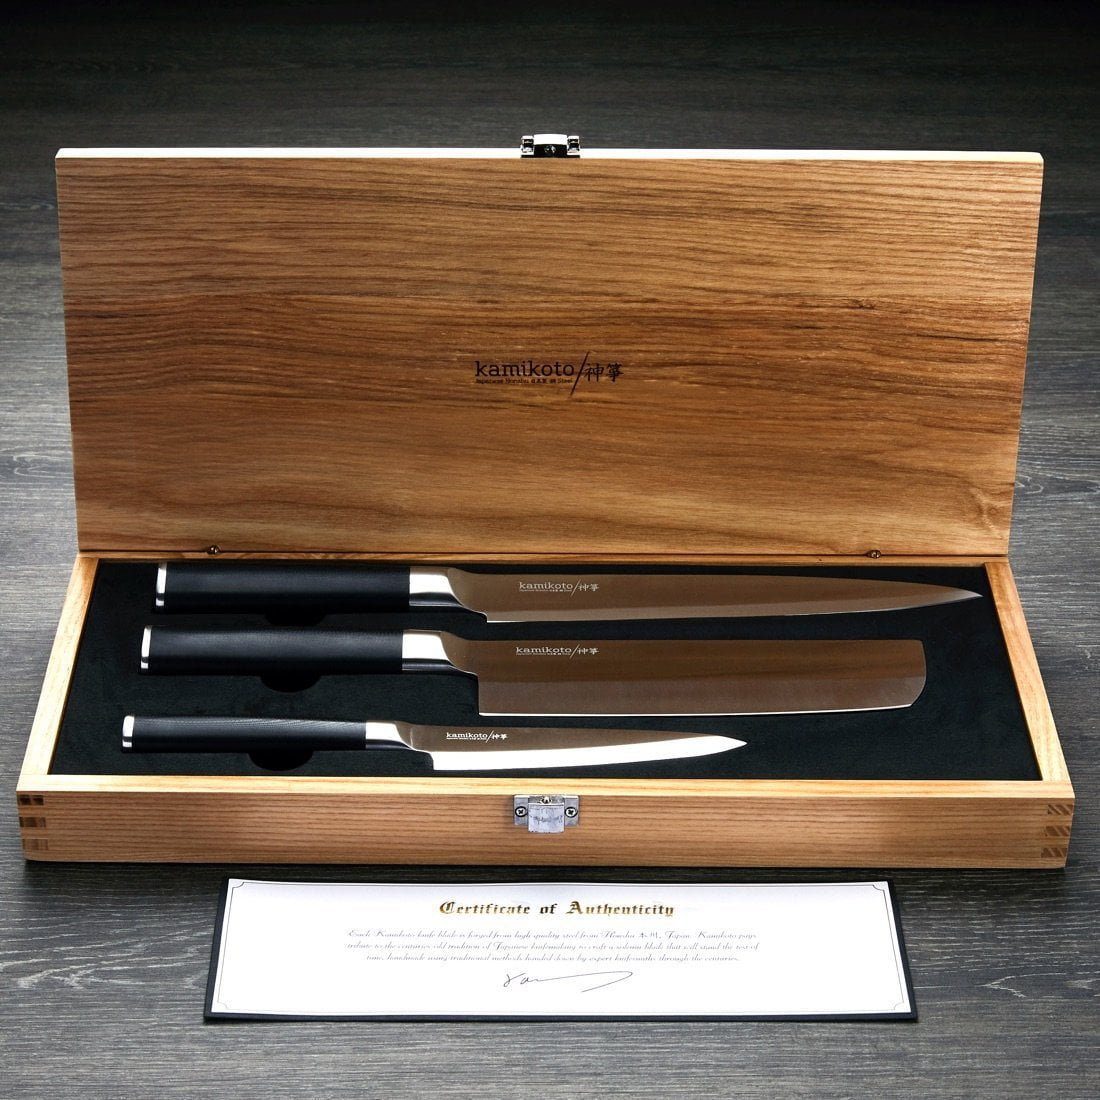 Best New Kamikoto Kensei 2 Knife Set With Knife Stand for sale in Metairie,  Louisiana for 2023